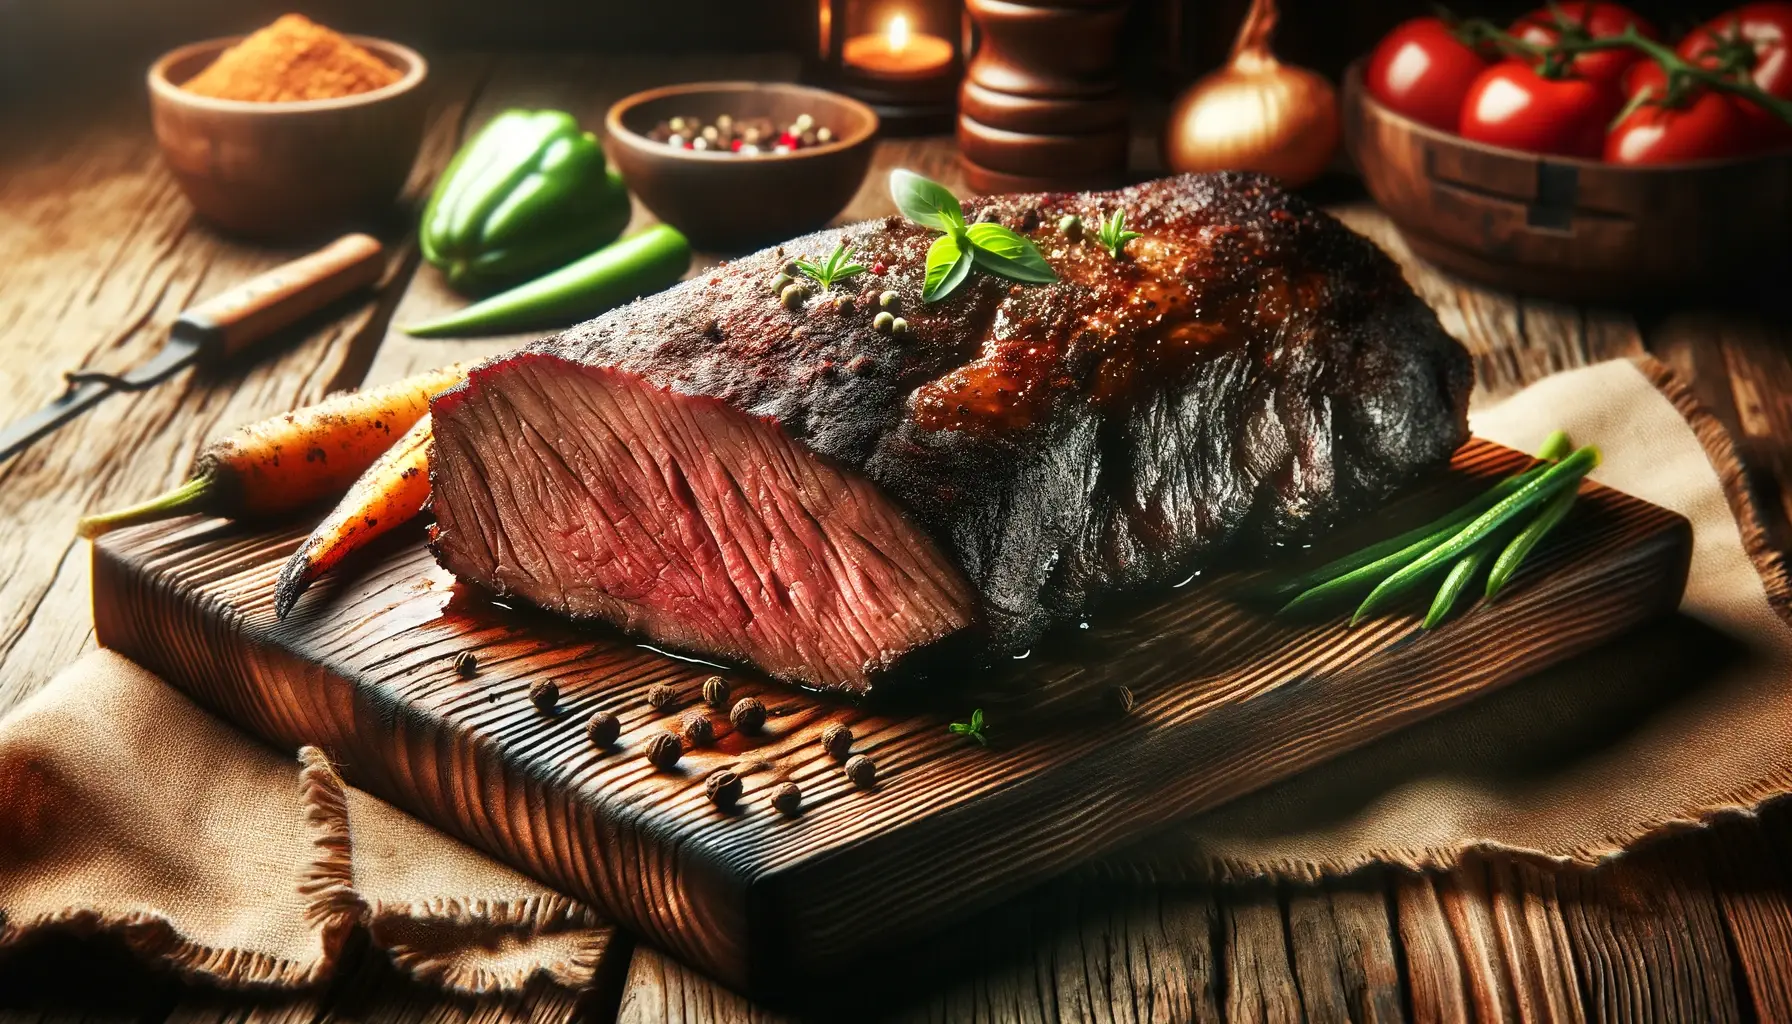 Tri Tip cooked to perfection with a rich, smoky crust, presented on a rustic wooden cutting board, complete with smoked vegetables and set in a cozy, outdoor barbecue atmosphere